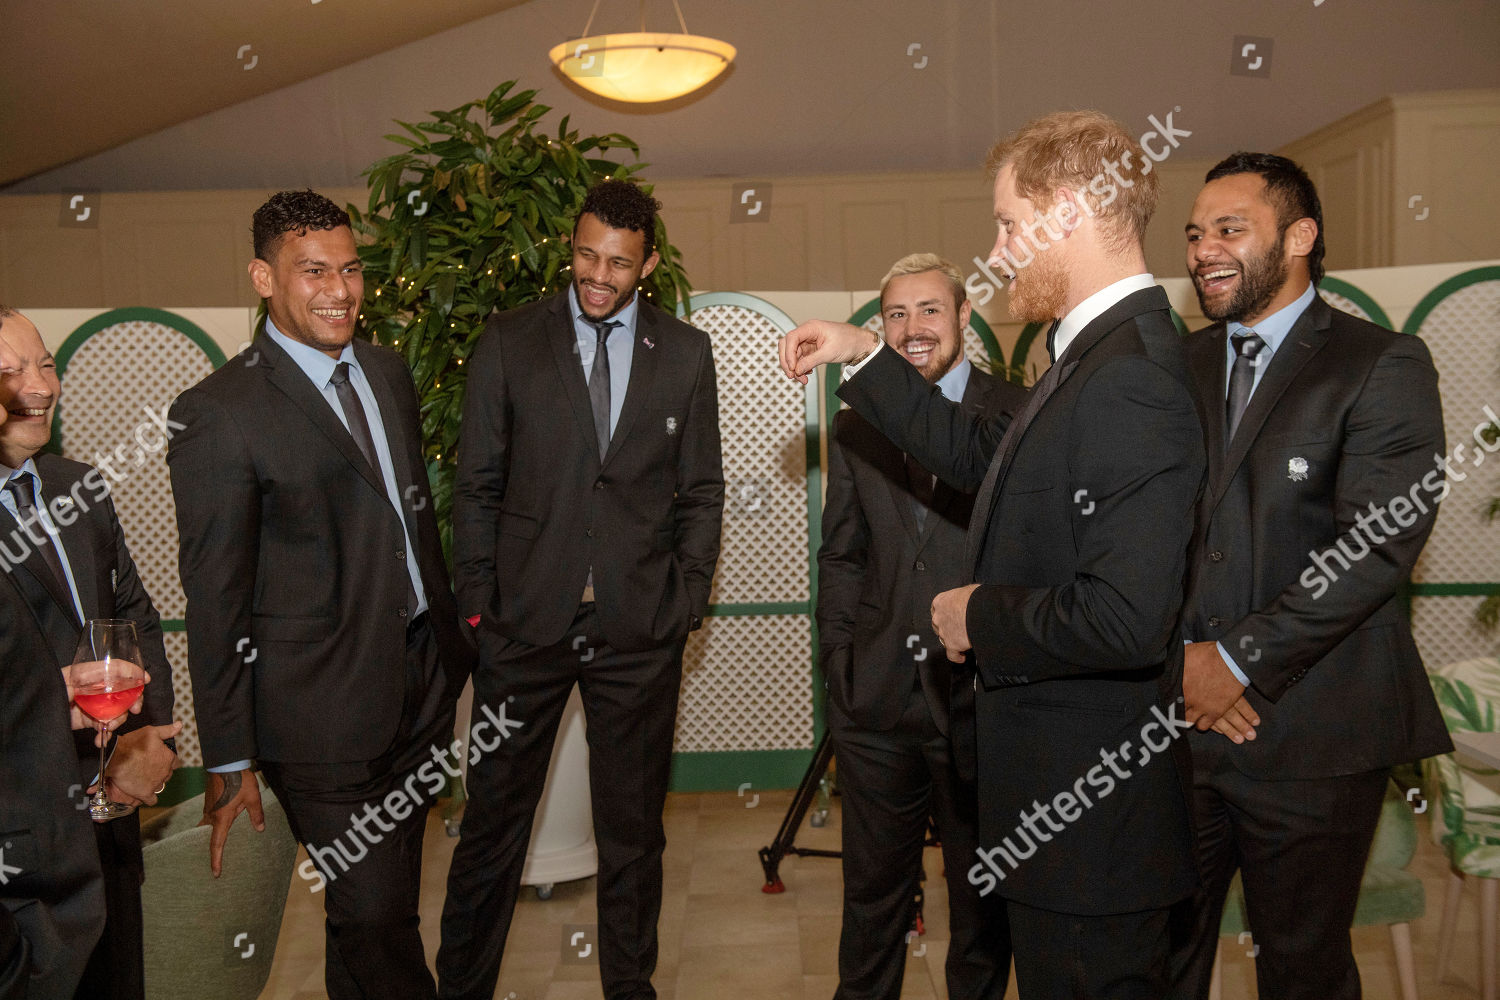 try-for-change-and-the-jonny-wilkinson-foundation-reception-london-uk-shutterstock-editorial-10104233p.jpg